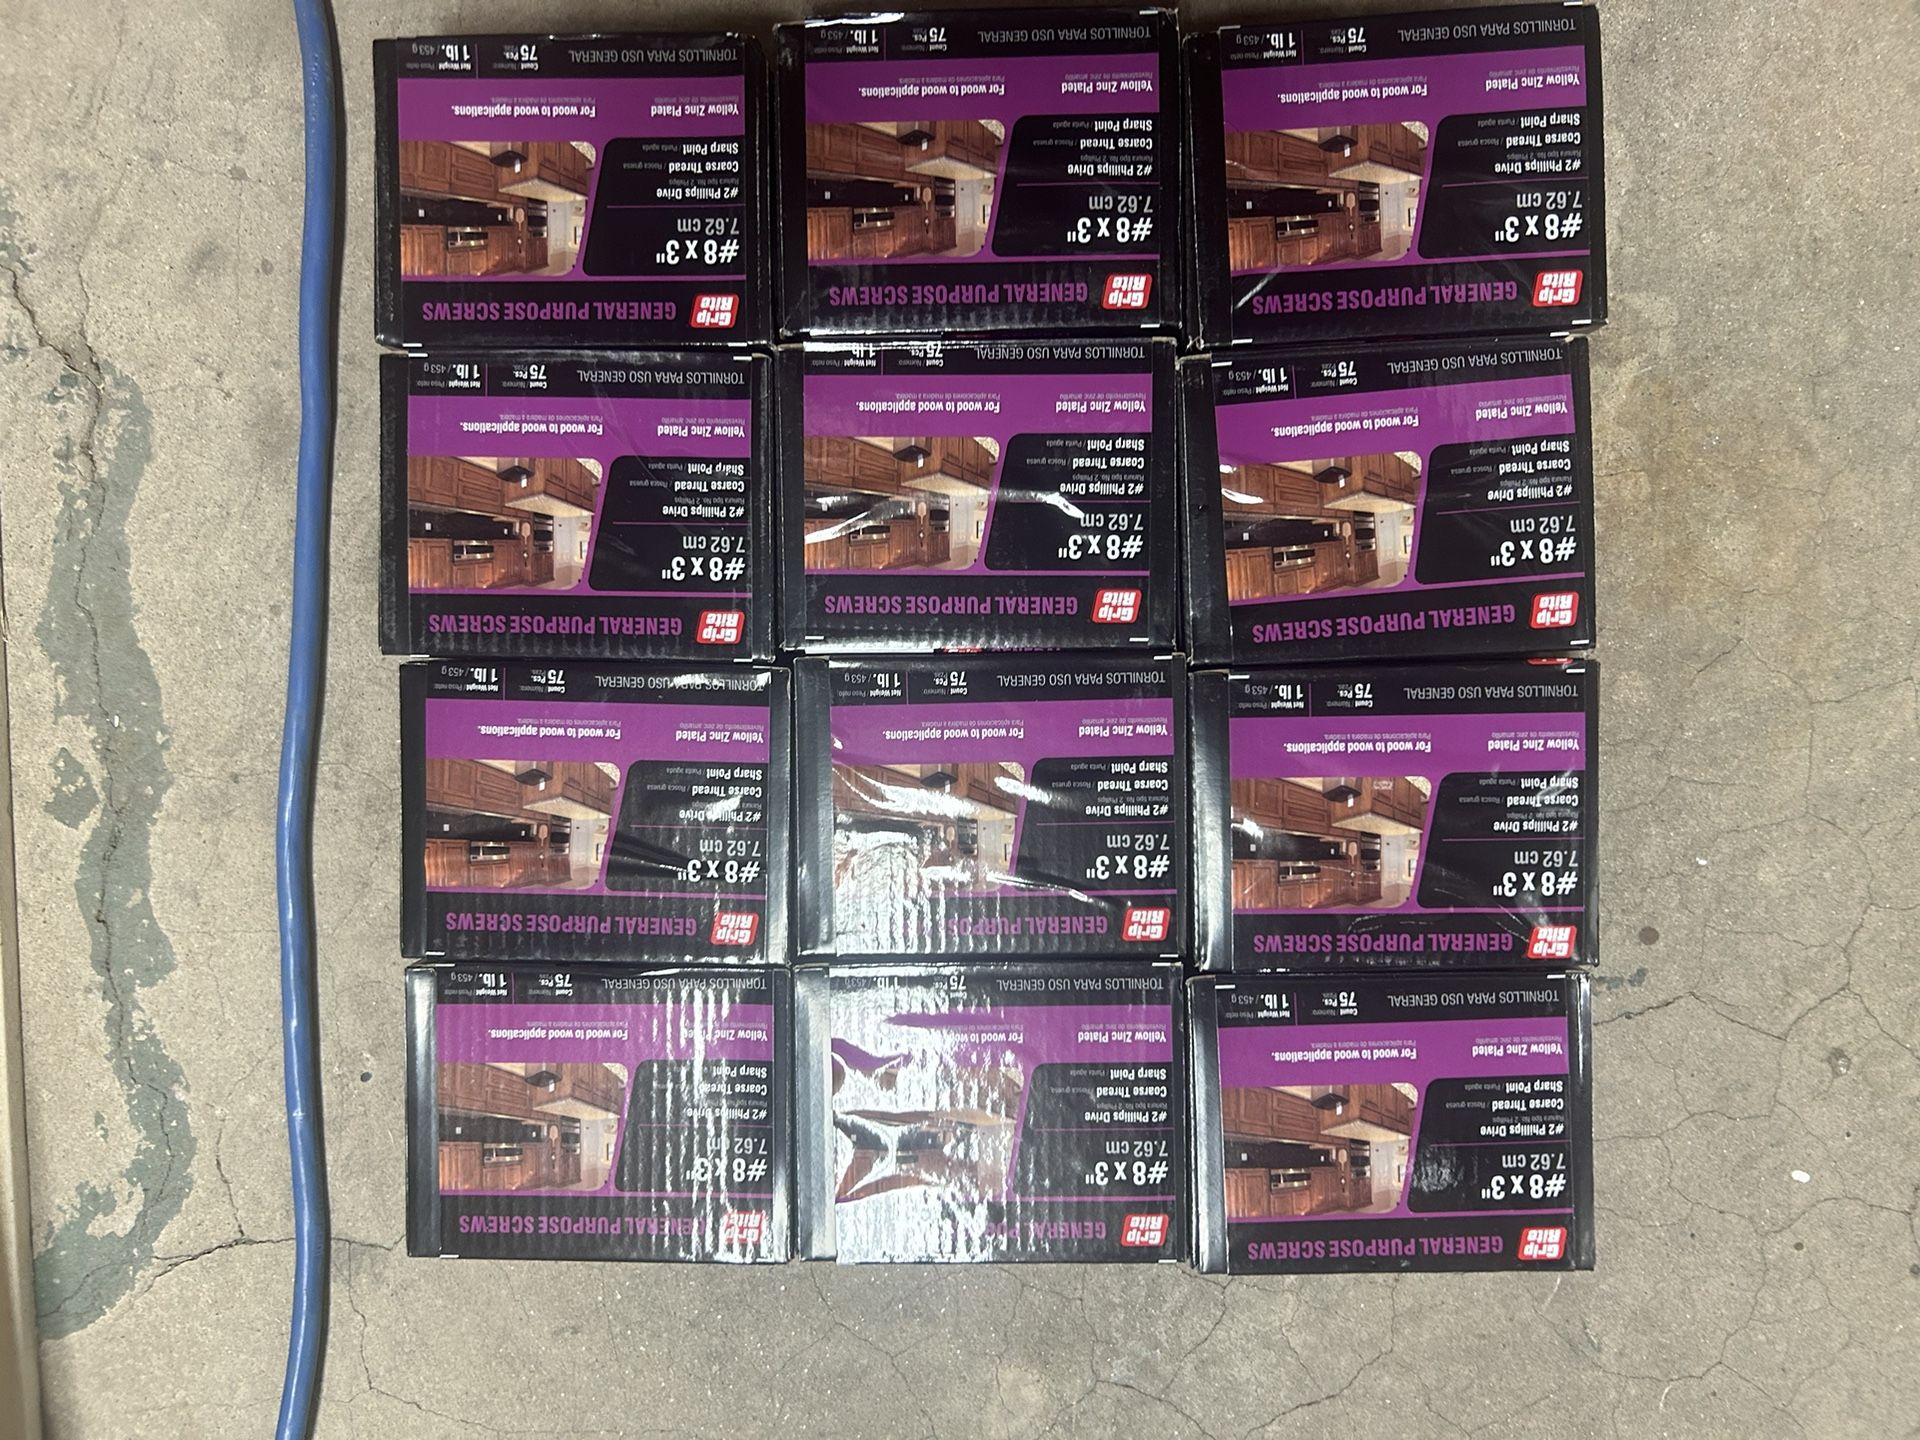 12 Boxes Of #8 3inch Philips Screws